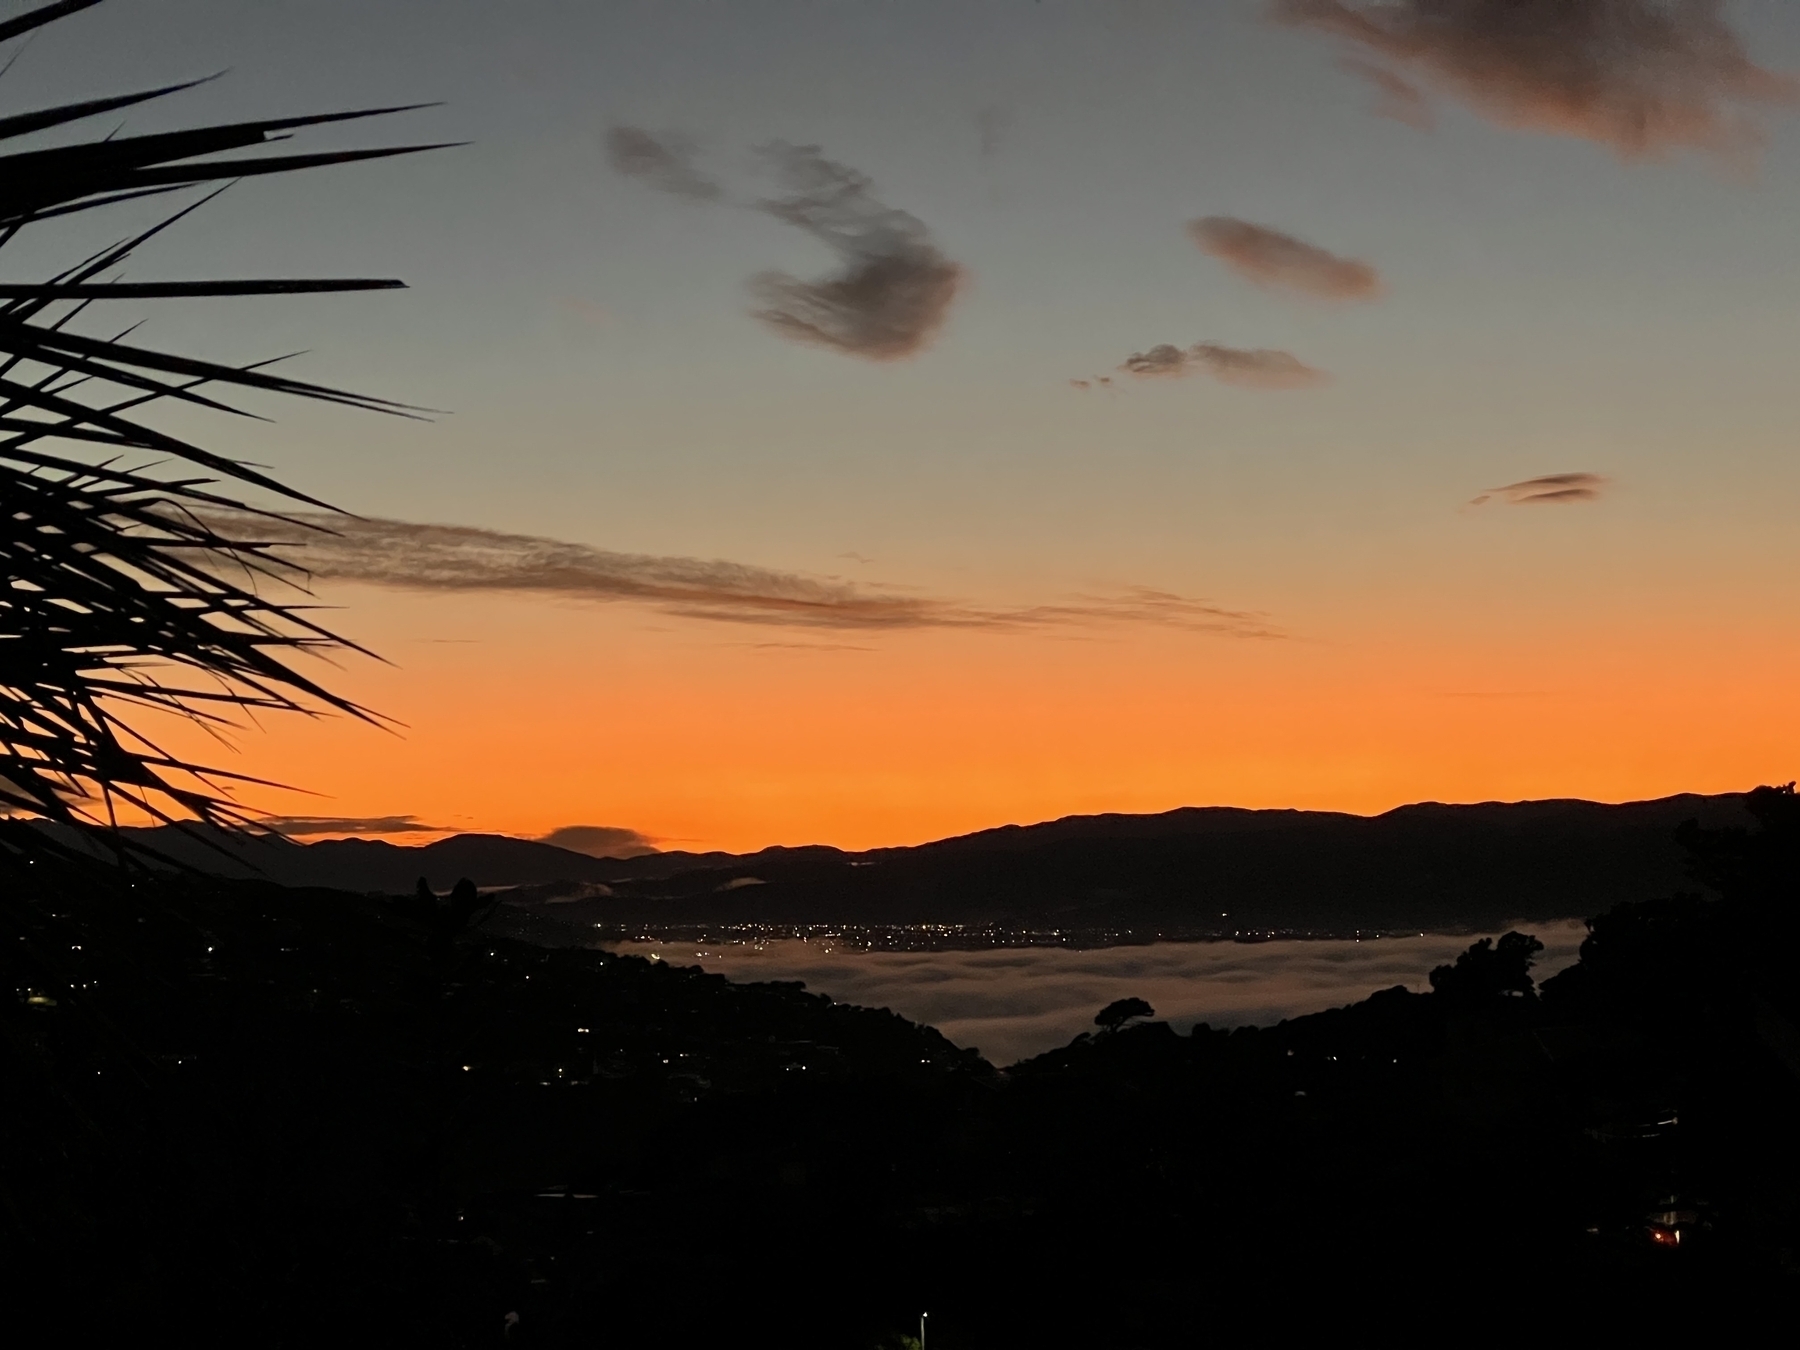 Dawn over Wellington Harbour looking north east. The sea is covered in a layer of fog, the sky a deep orange over dark hills.